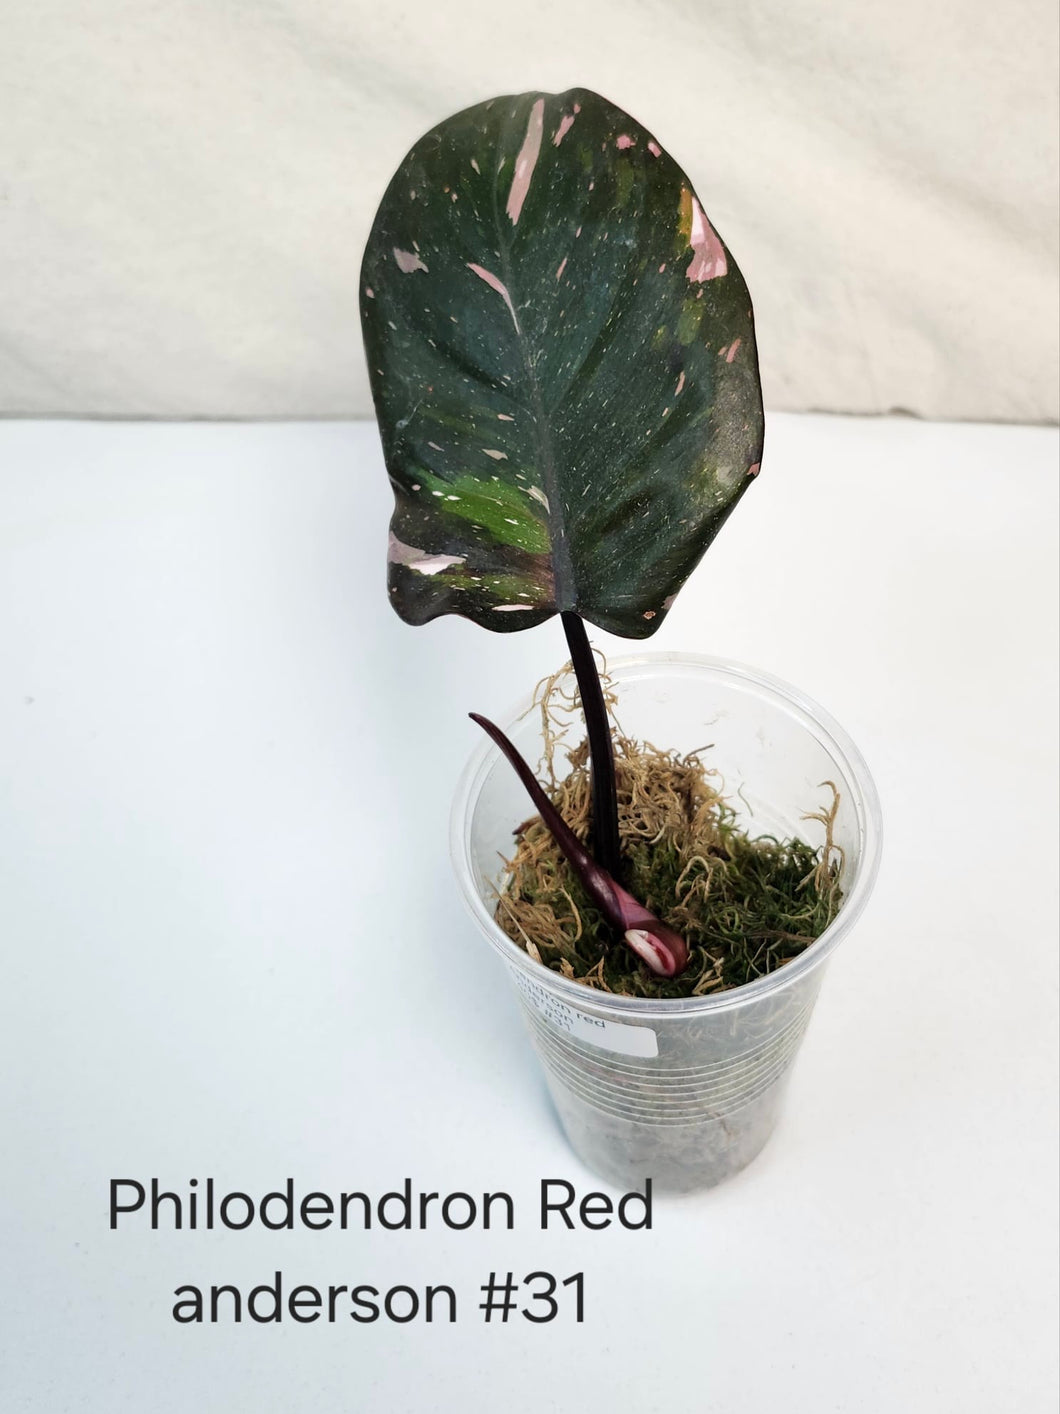 Philodendron red  anderson # 31